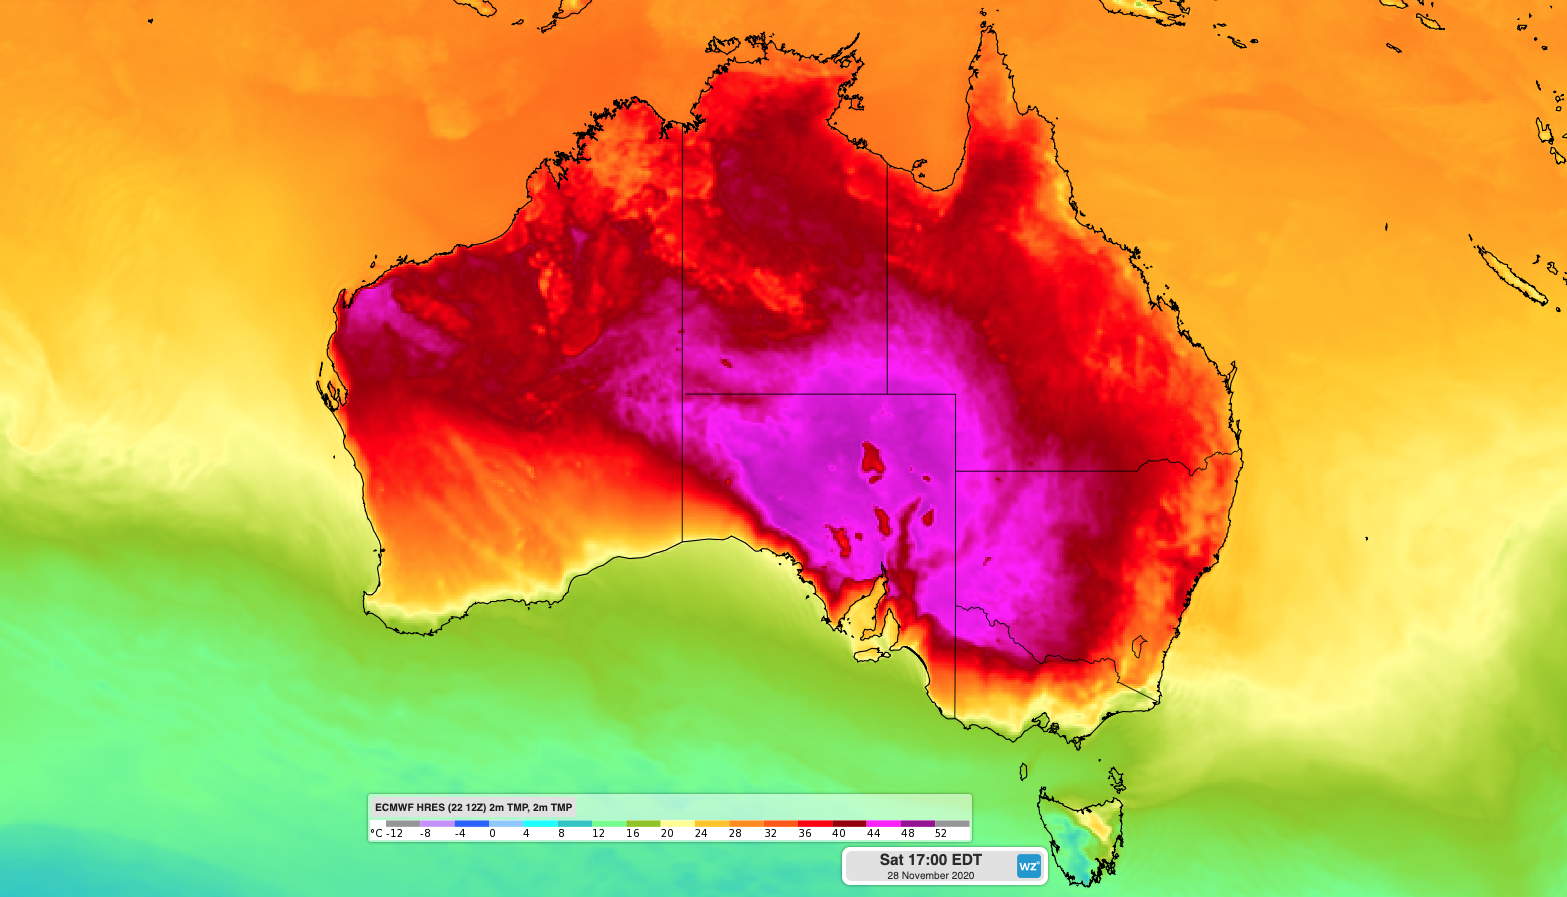 Hot end to spring in Australia